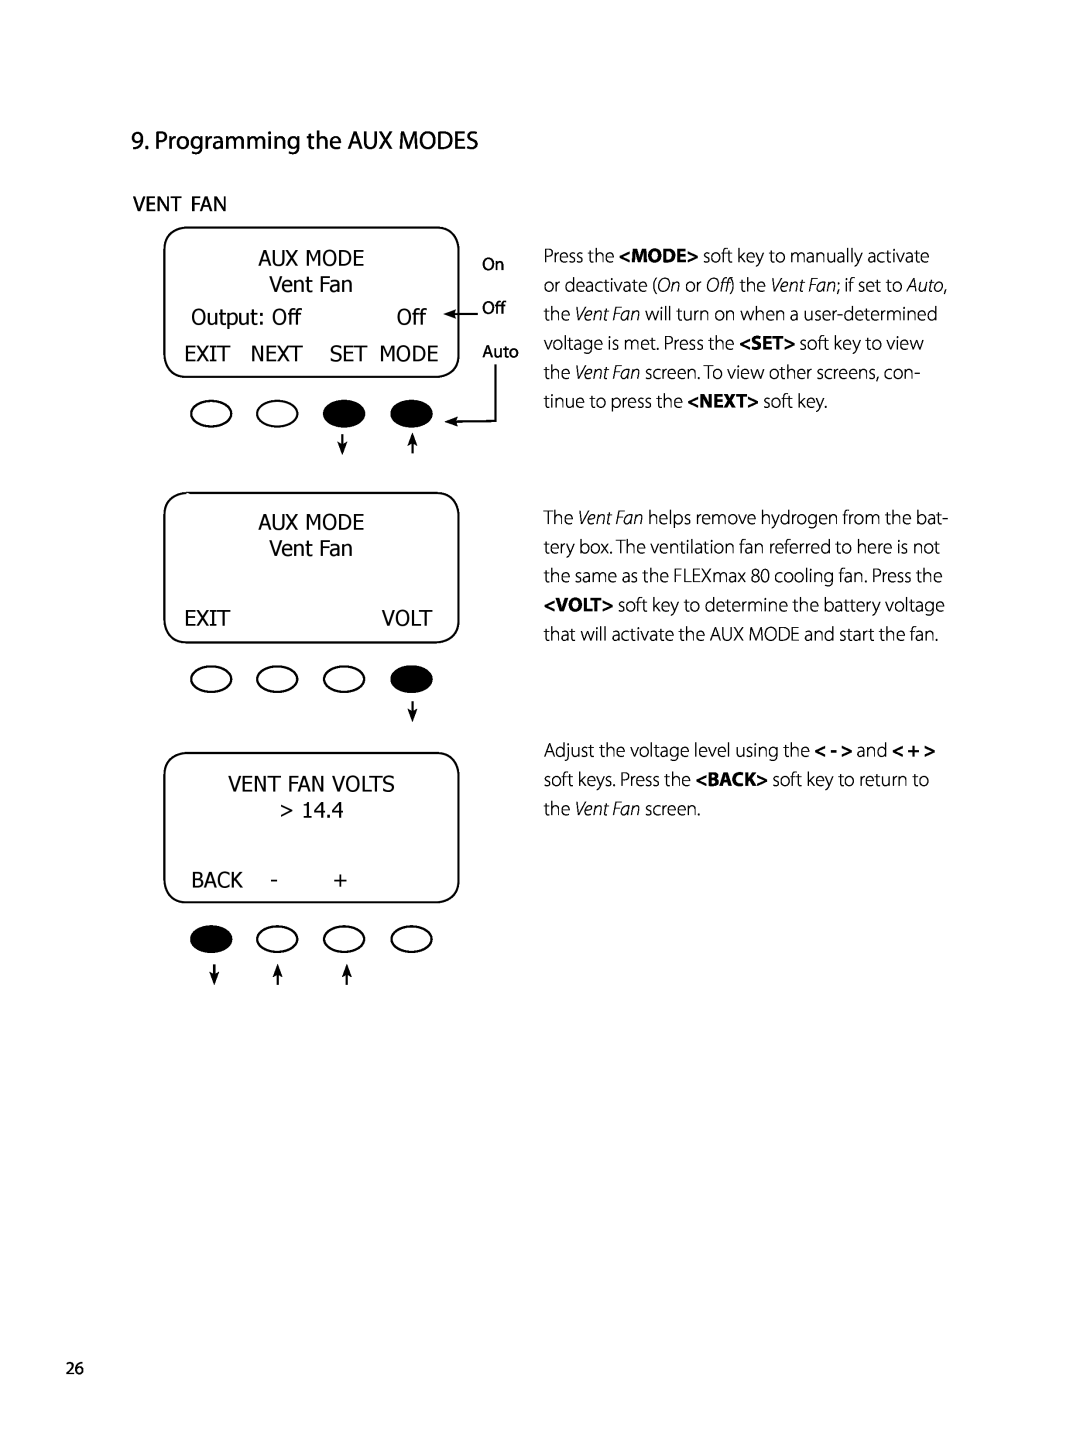 Outback Power Systems 80 user manual Programming the AUX MODES, Vent Fan, Exit Next, Set Mode, Aux Mode, Output Off 